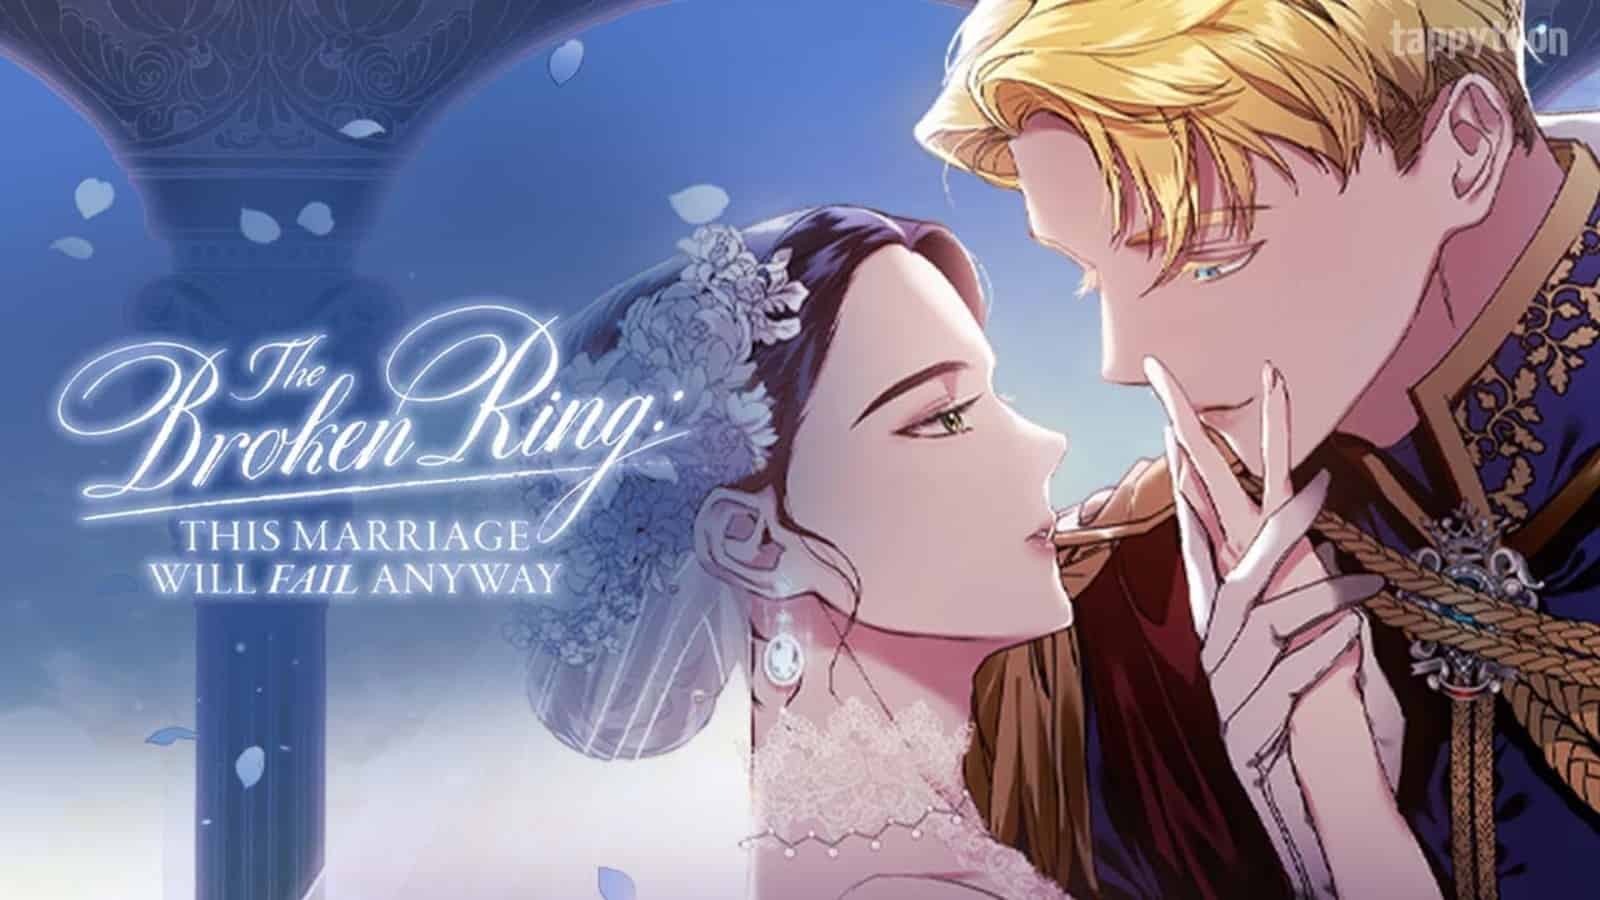 The Broken Ring : This Marriage will Fail Anyway cover